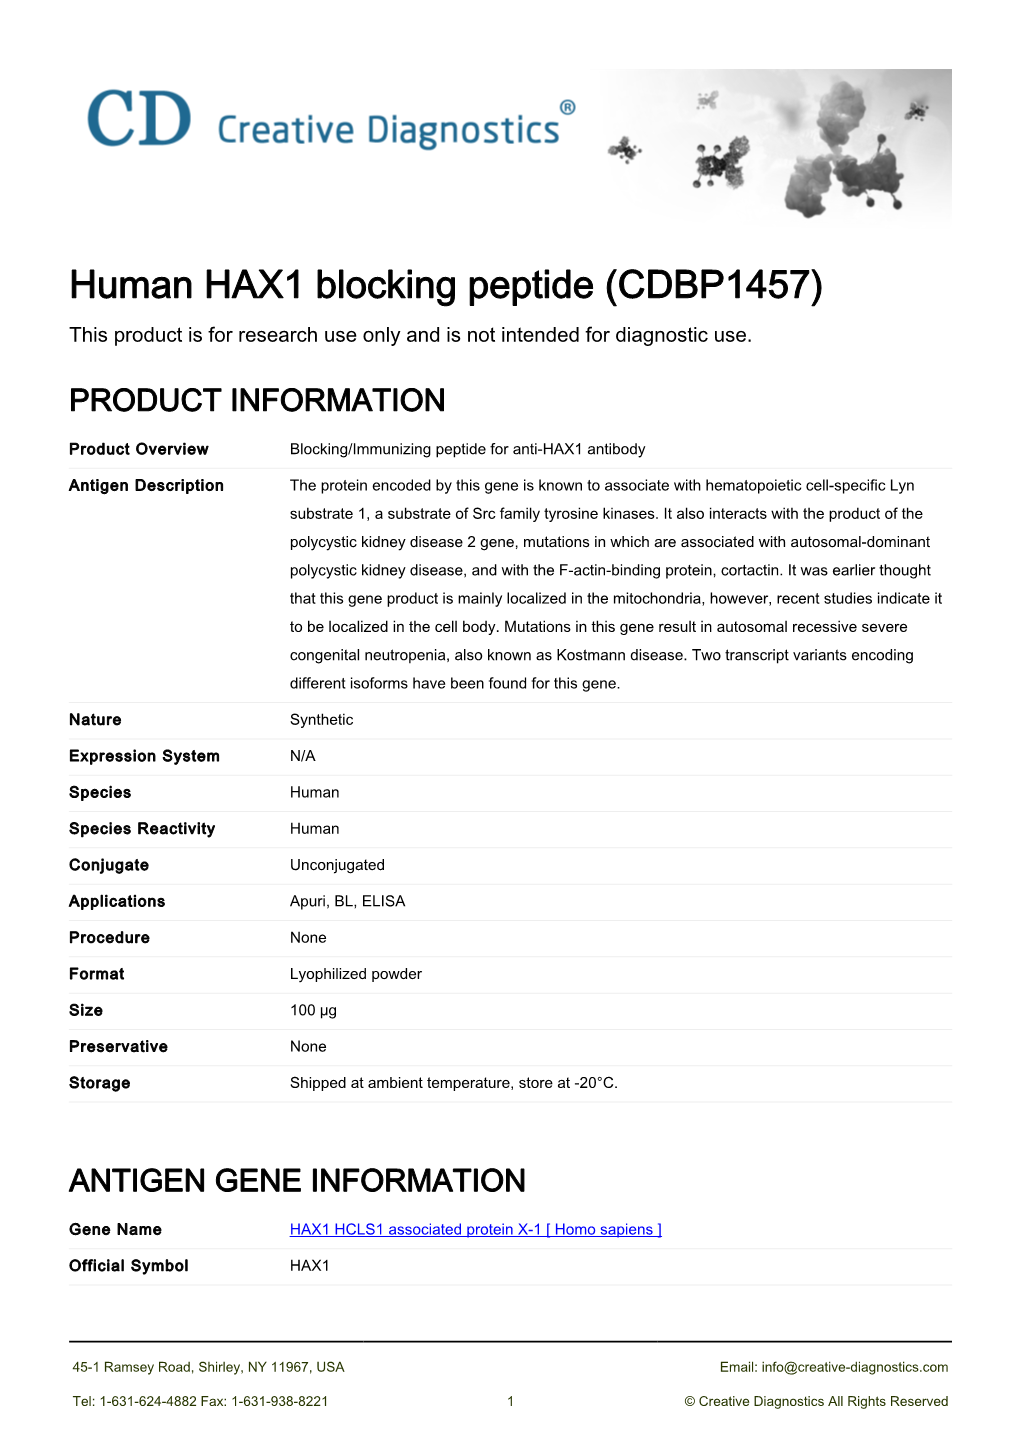 Human HAX1 Blocking Peptide (CDBP1457) This Product Is for Research Use Only and Is Not Intended for Diagnostic Use